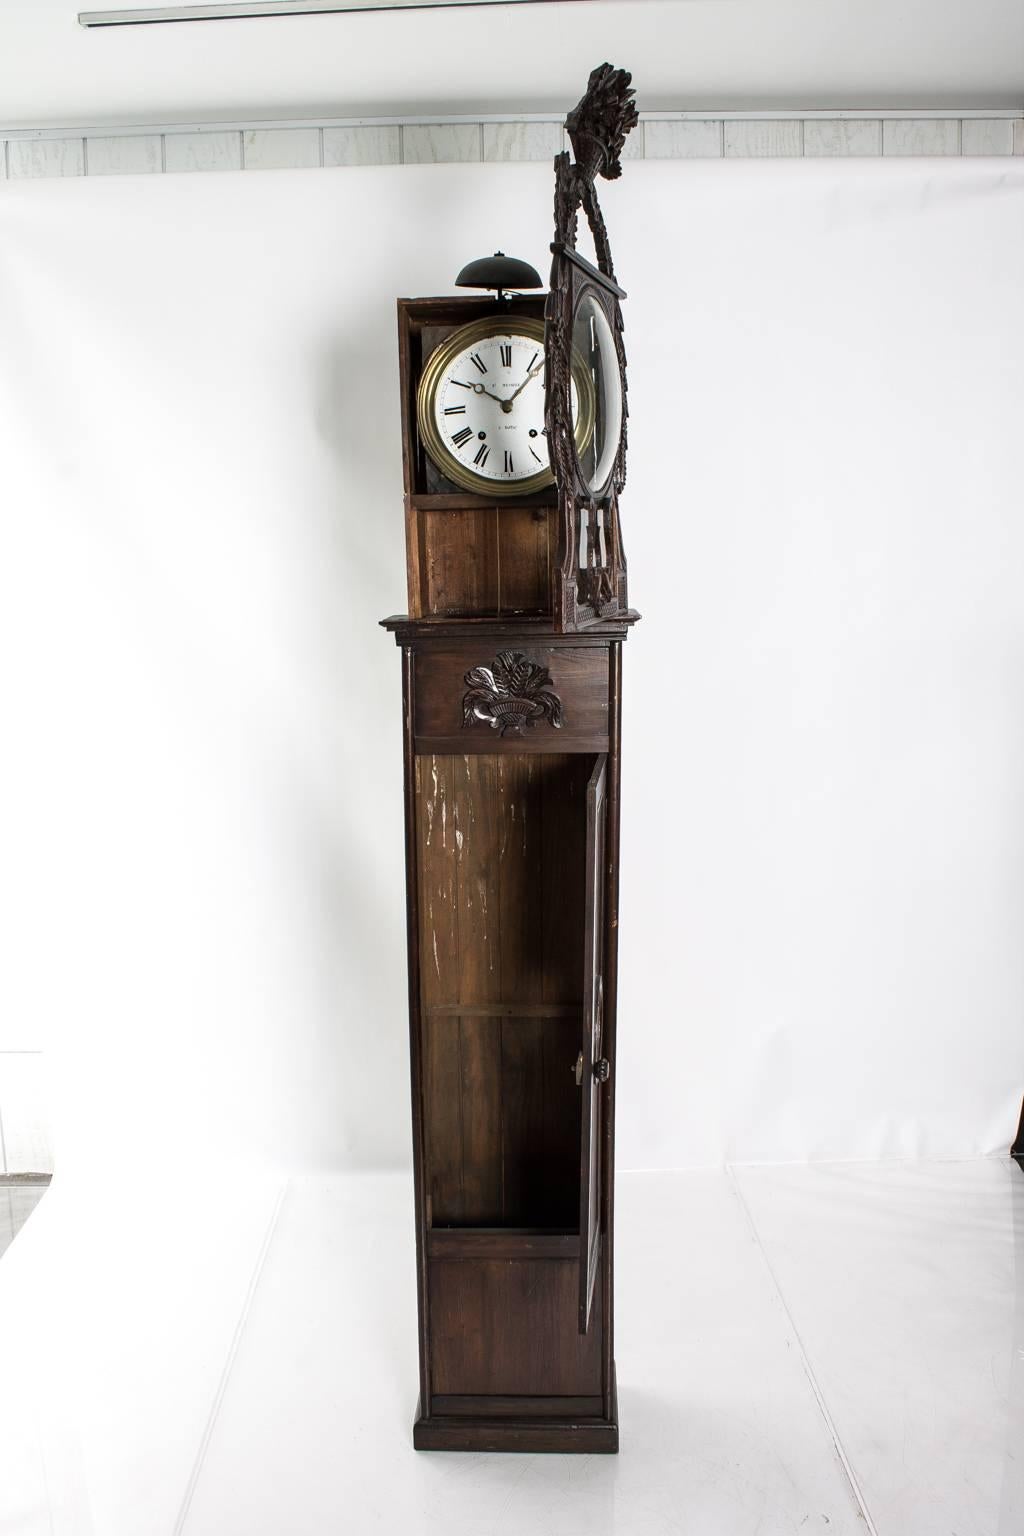 19th century French pine grandfather clock with carved flowers, wheat and basket of fruit. Clock face signed: Auffay, Mesaize.